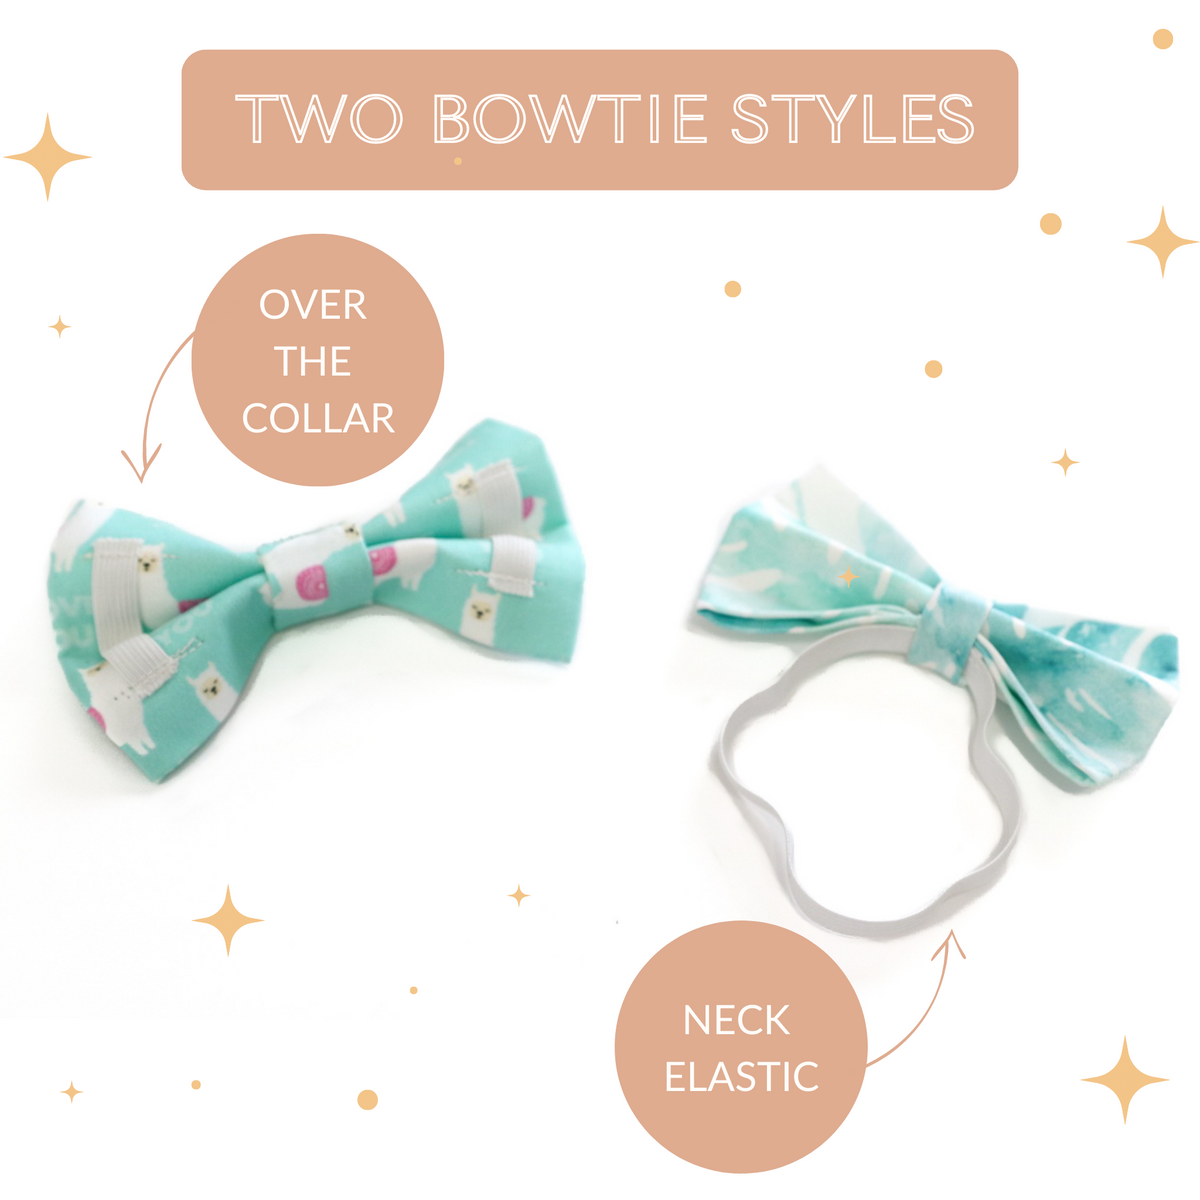 over the collar or neck elastic dog bow ties